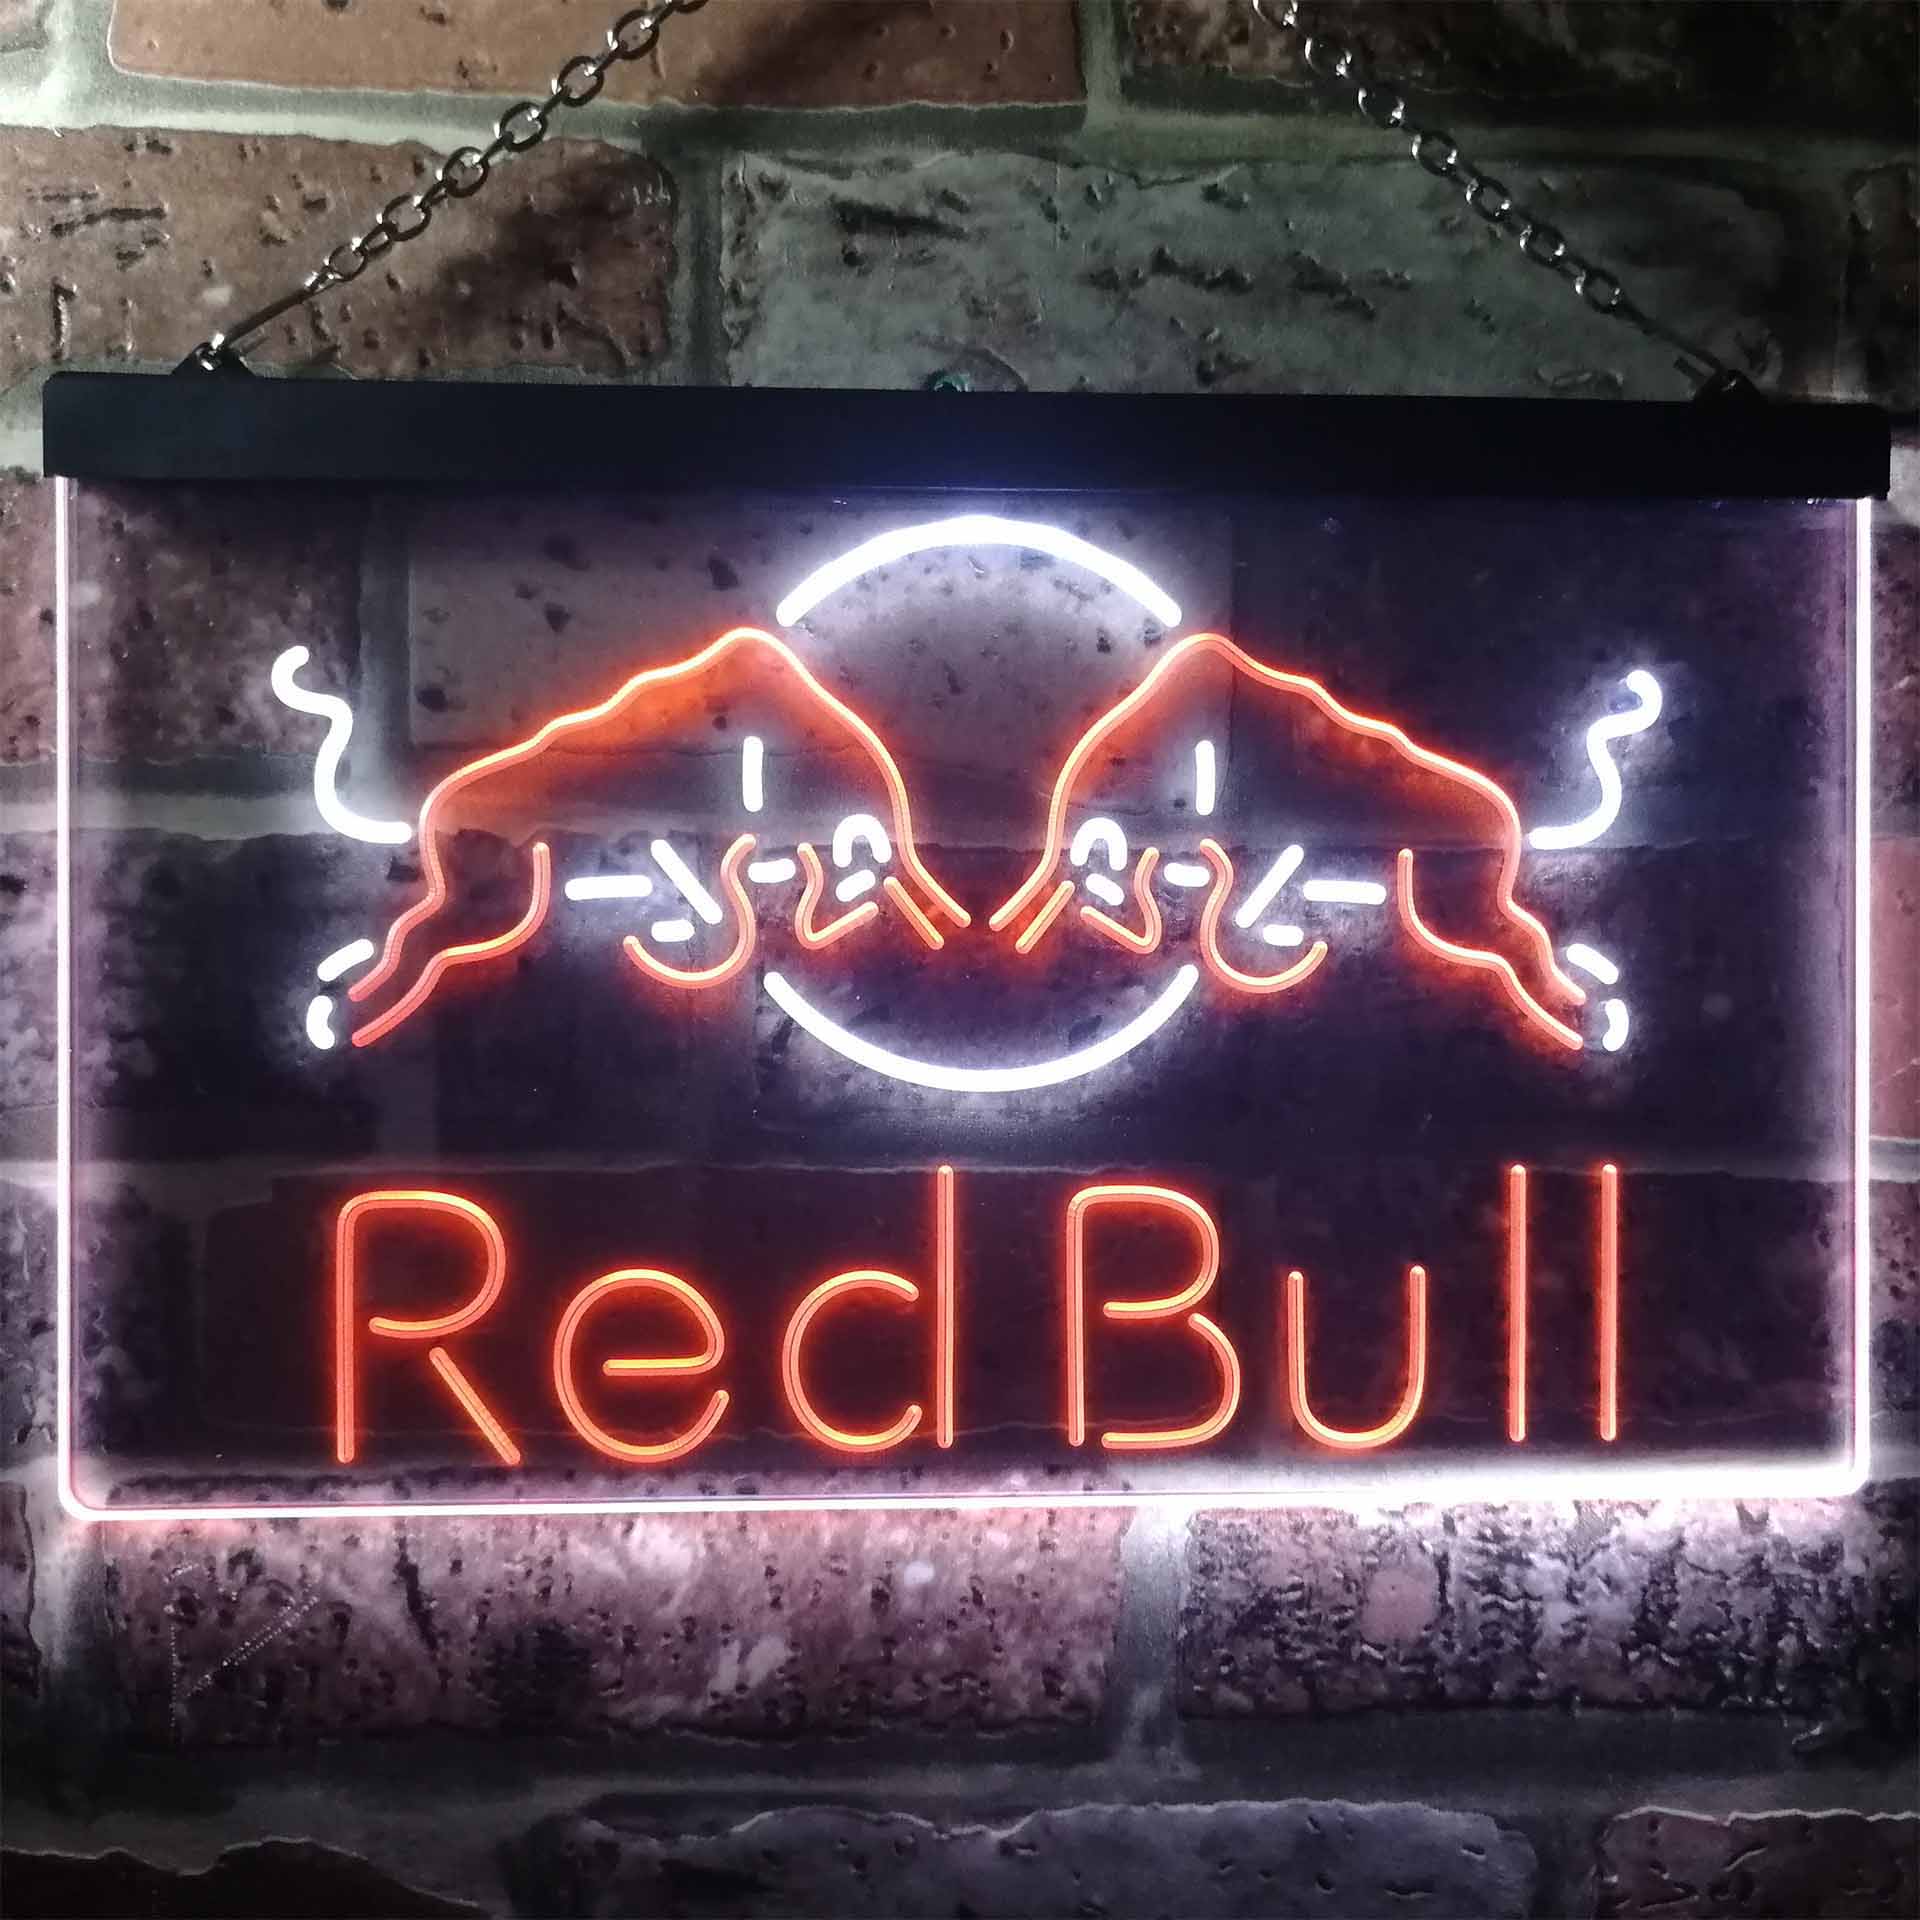 Red Bull Sport Neon Sign - LED LAB CAVE